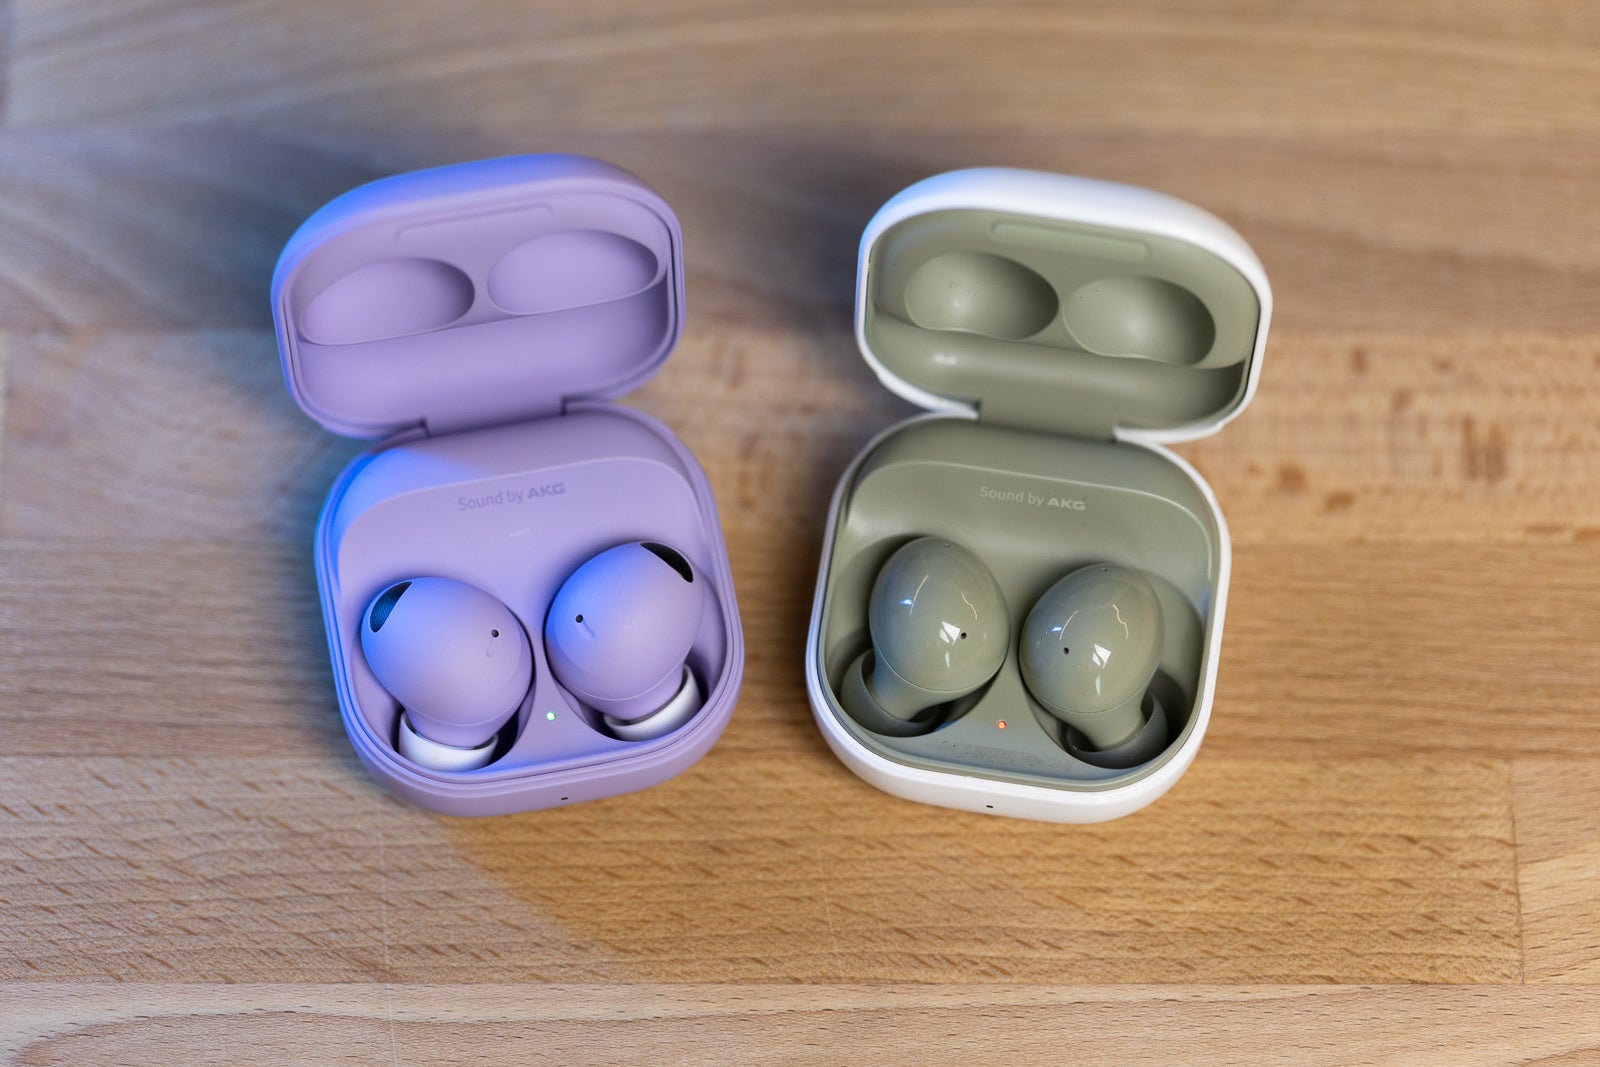 (Image credit - PhoneArena) Galaxy Buds 2 Pro (left) and Galaxy Buds 2 (right) - Galaxy Buds 2 Pro vs Galaxy Buds 2: Can you hear the difference?  Or even see it?